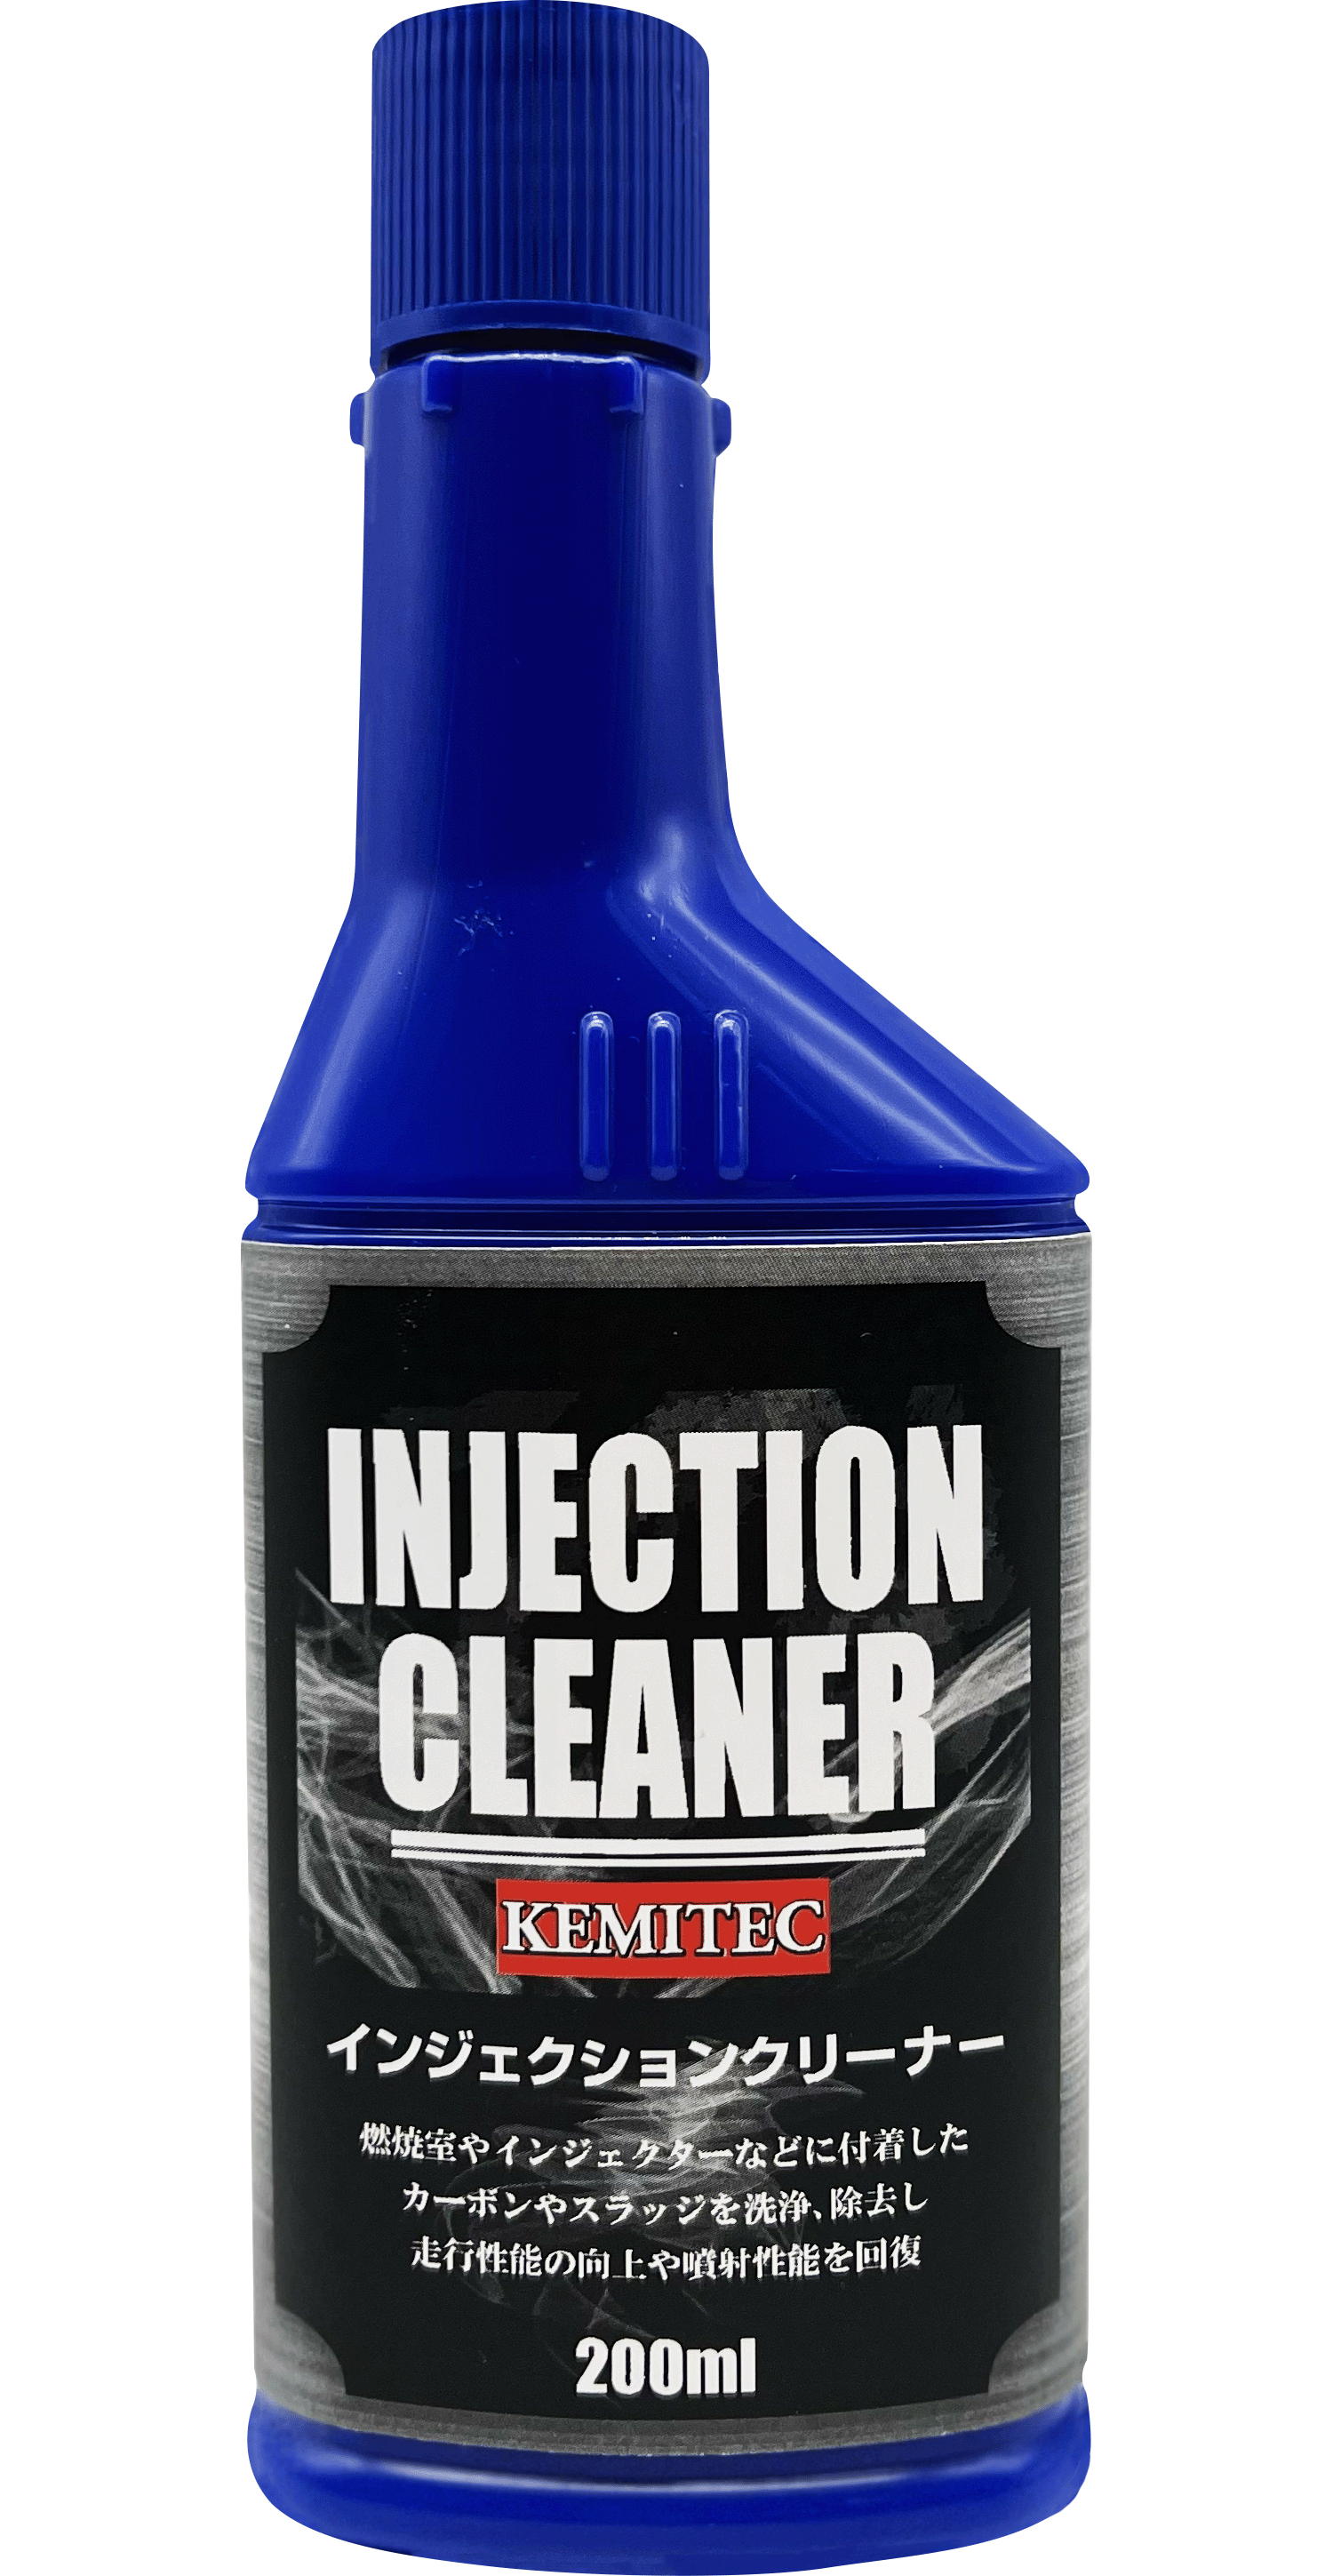 INJECTION CLEANER